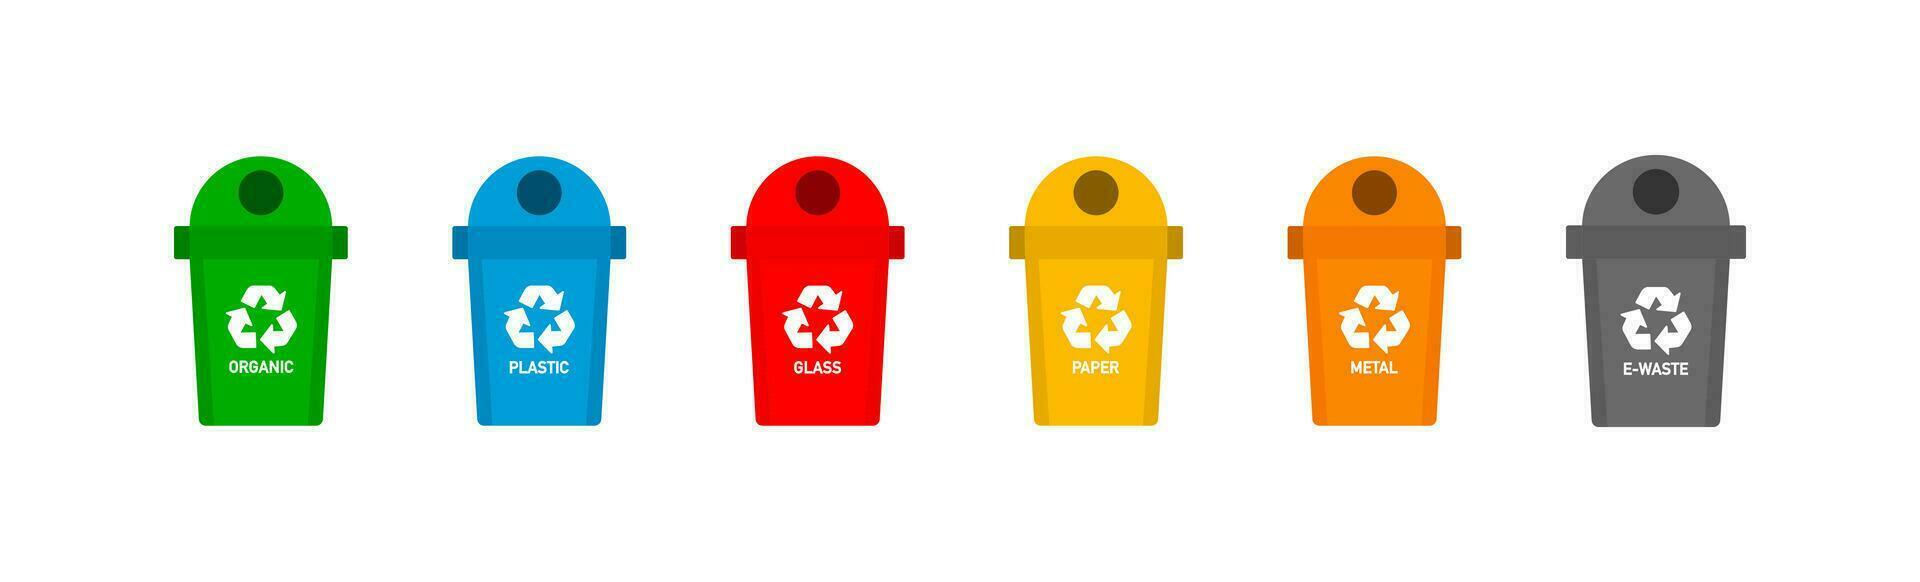 Colorful recycling bins for waste separation icon set. Bin trash vector